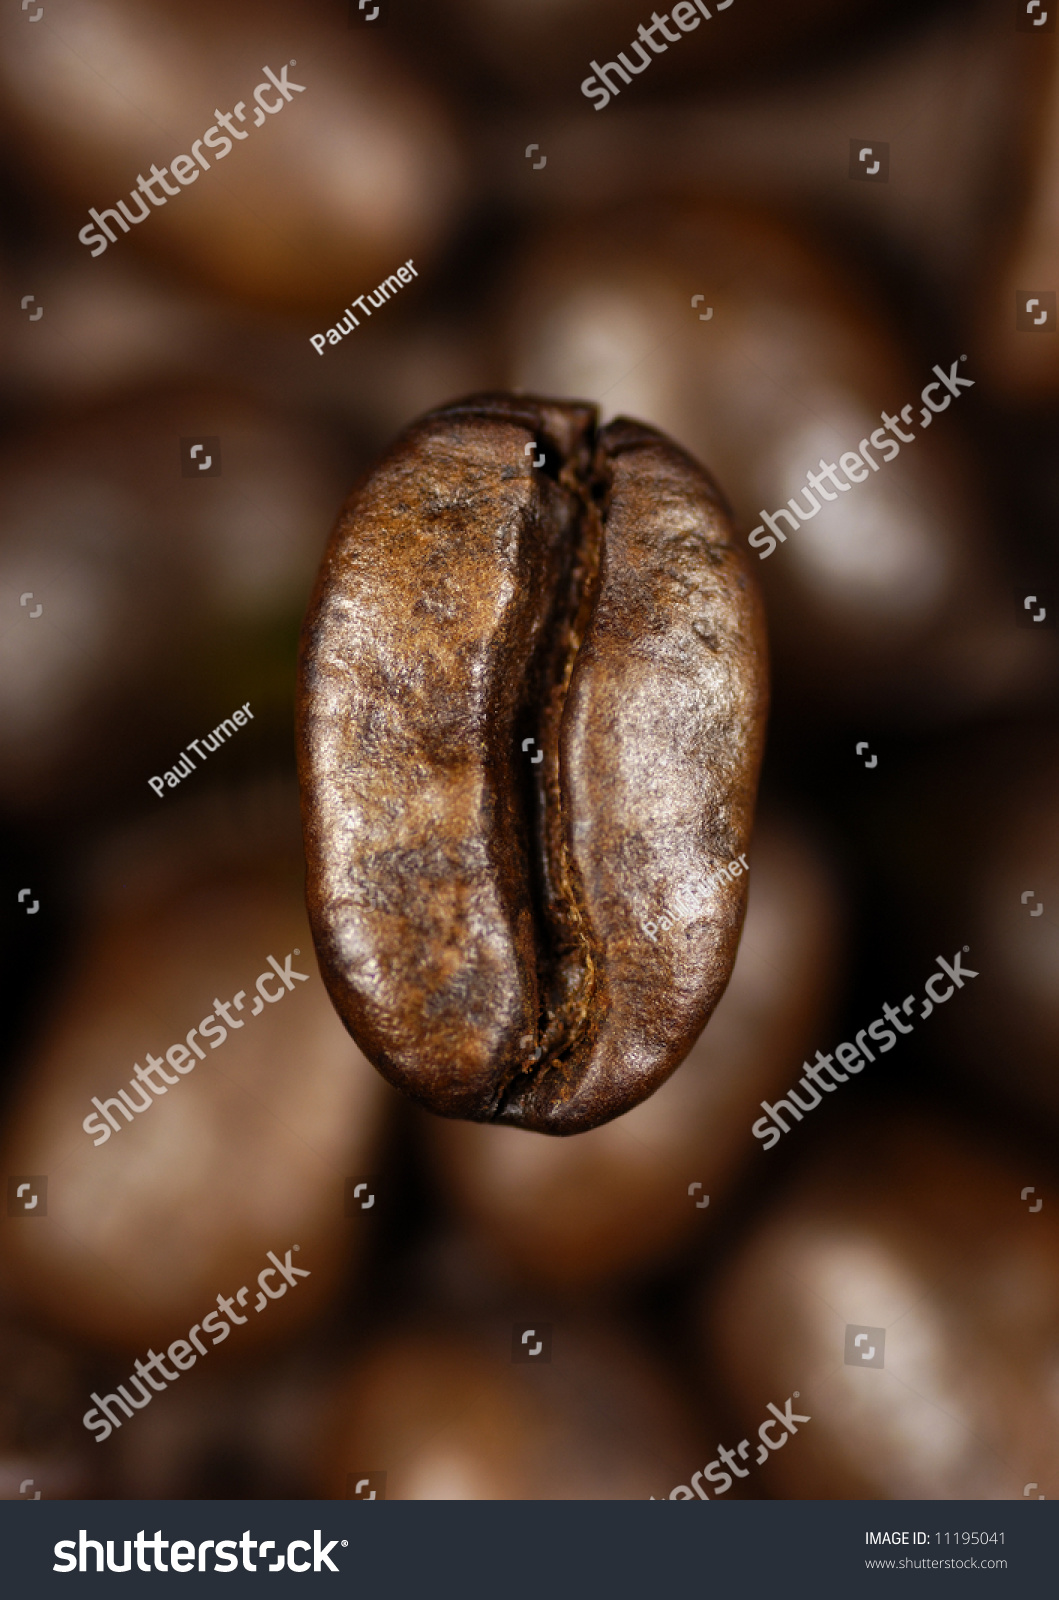 single coffee bean on a background of blurred coffee beans #11195041